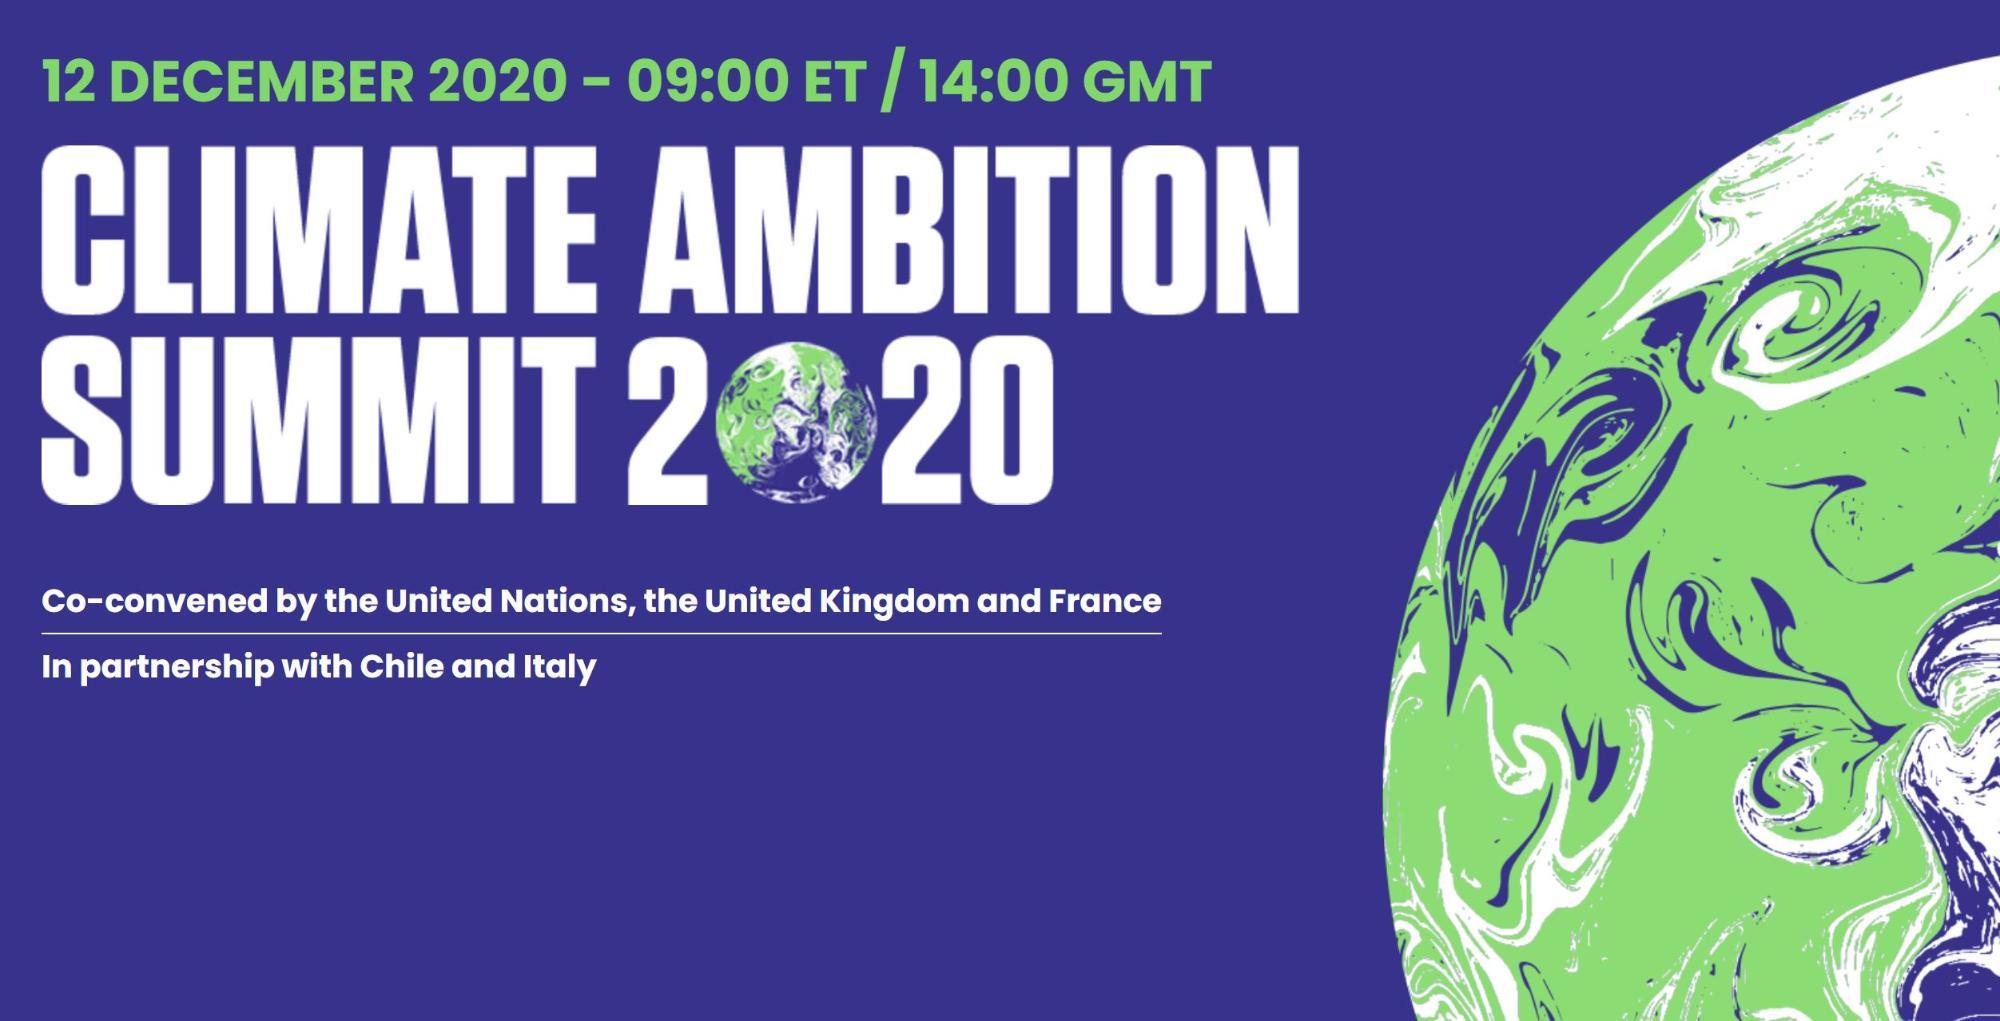 Climate Ambition Summit President Hoyer calls on partners to